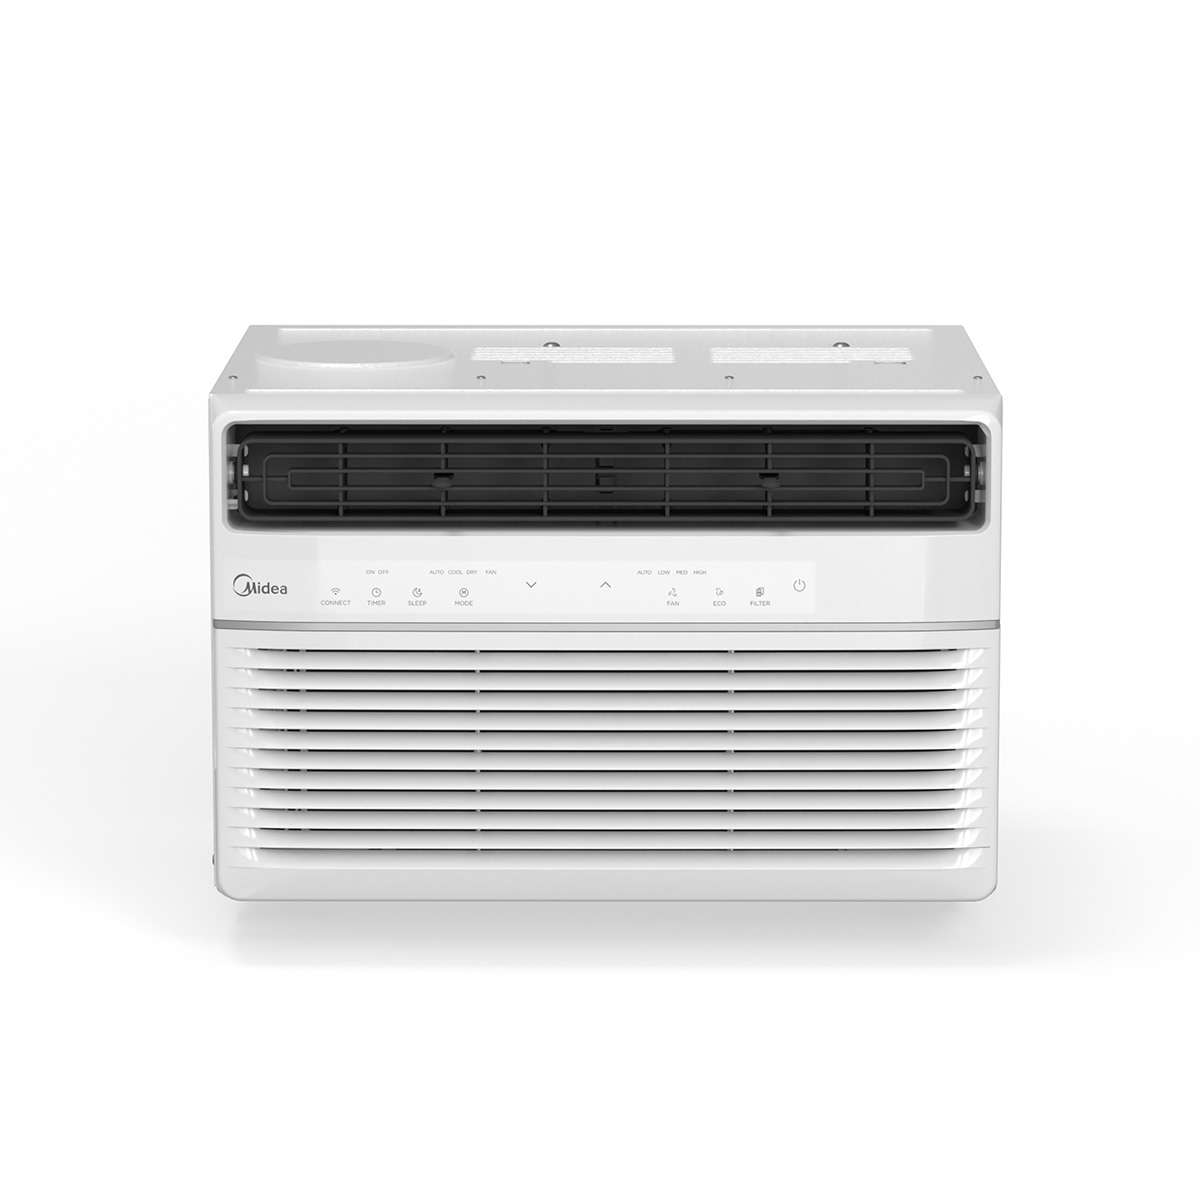 Midea 6,000 BTU Window AC, 3 -in-1 Cools, Dehumidifies and Circulates, Washable Filter, Remote Control, up to 250 Sq. Ft.